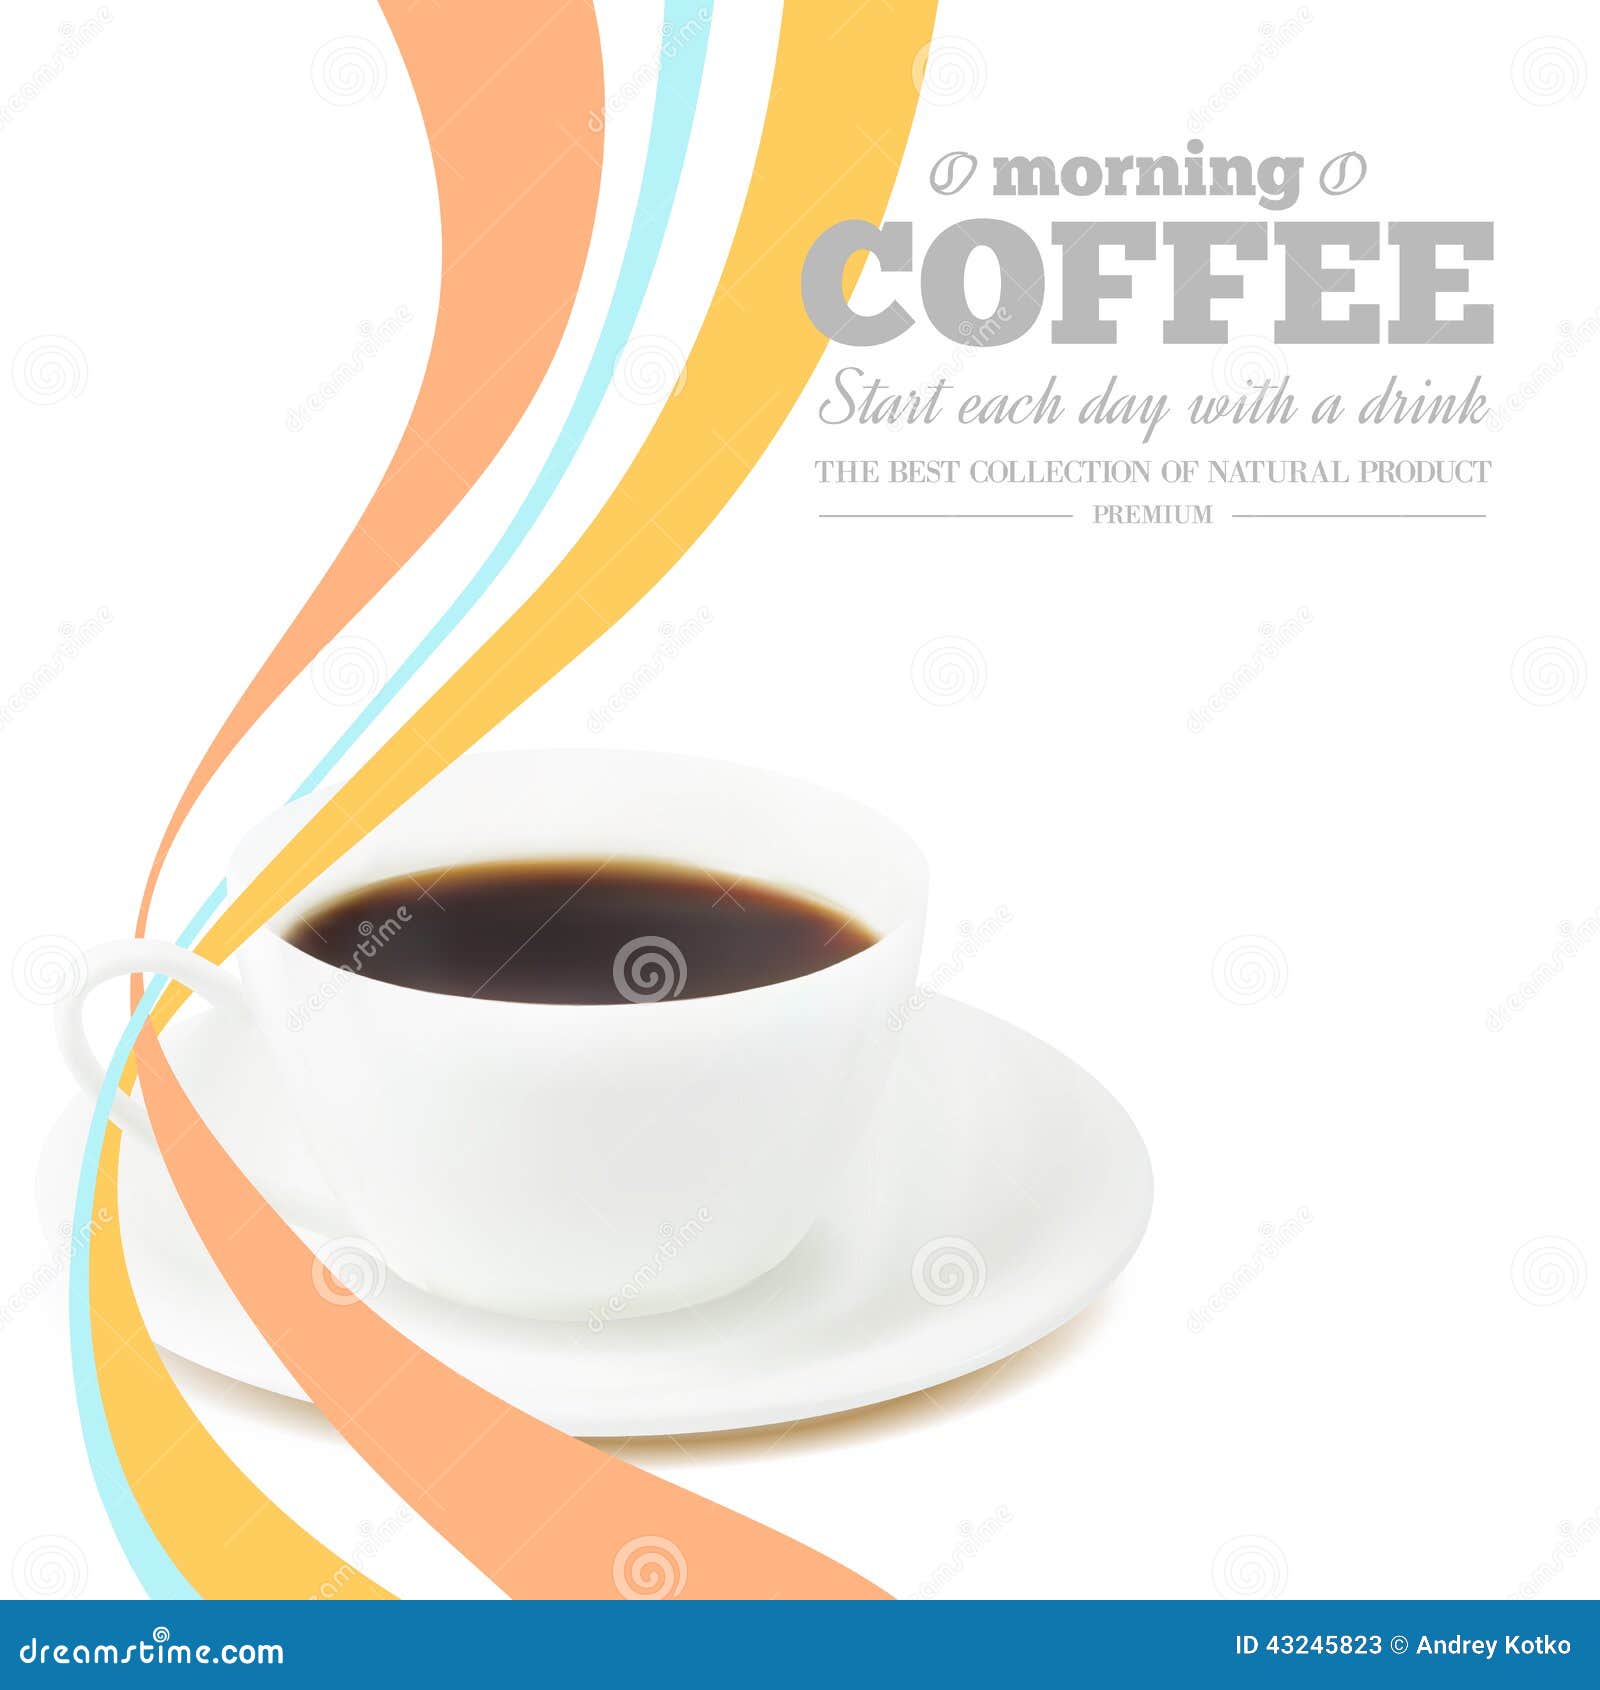 coffee morning clipart - photo #43